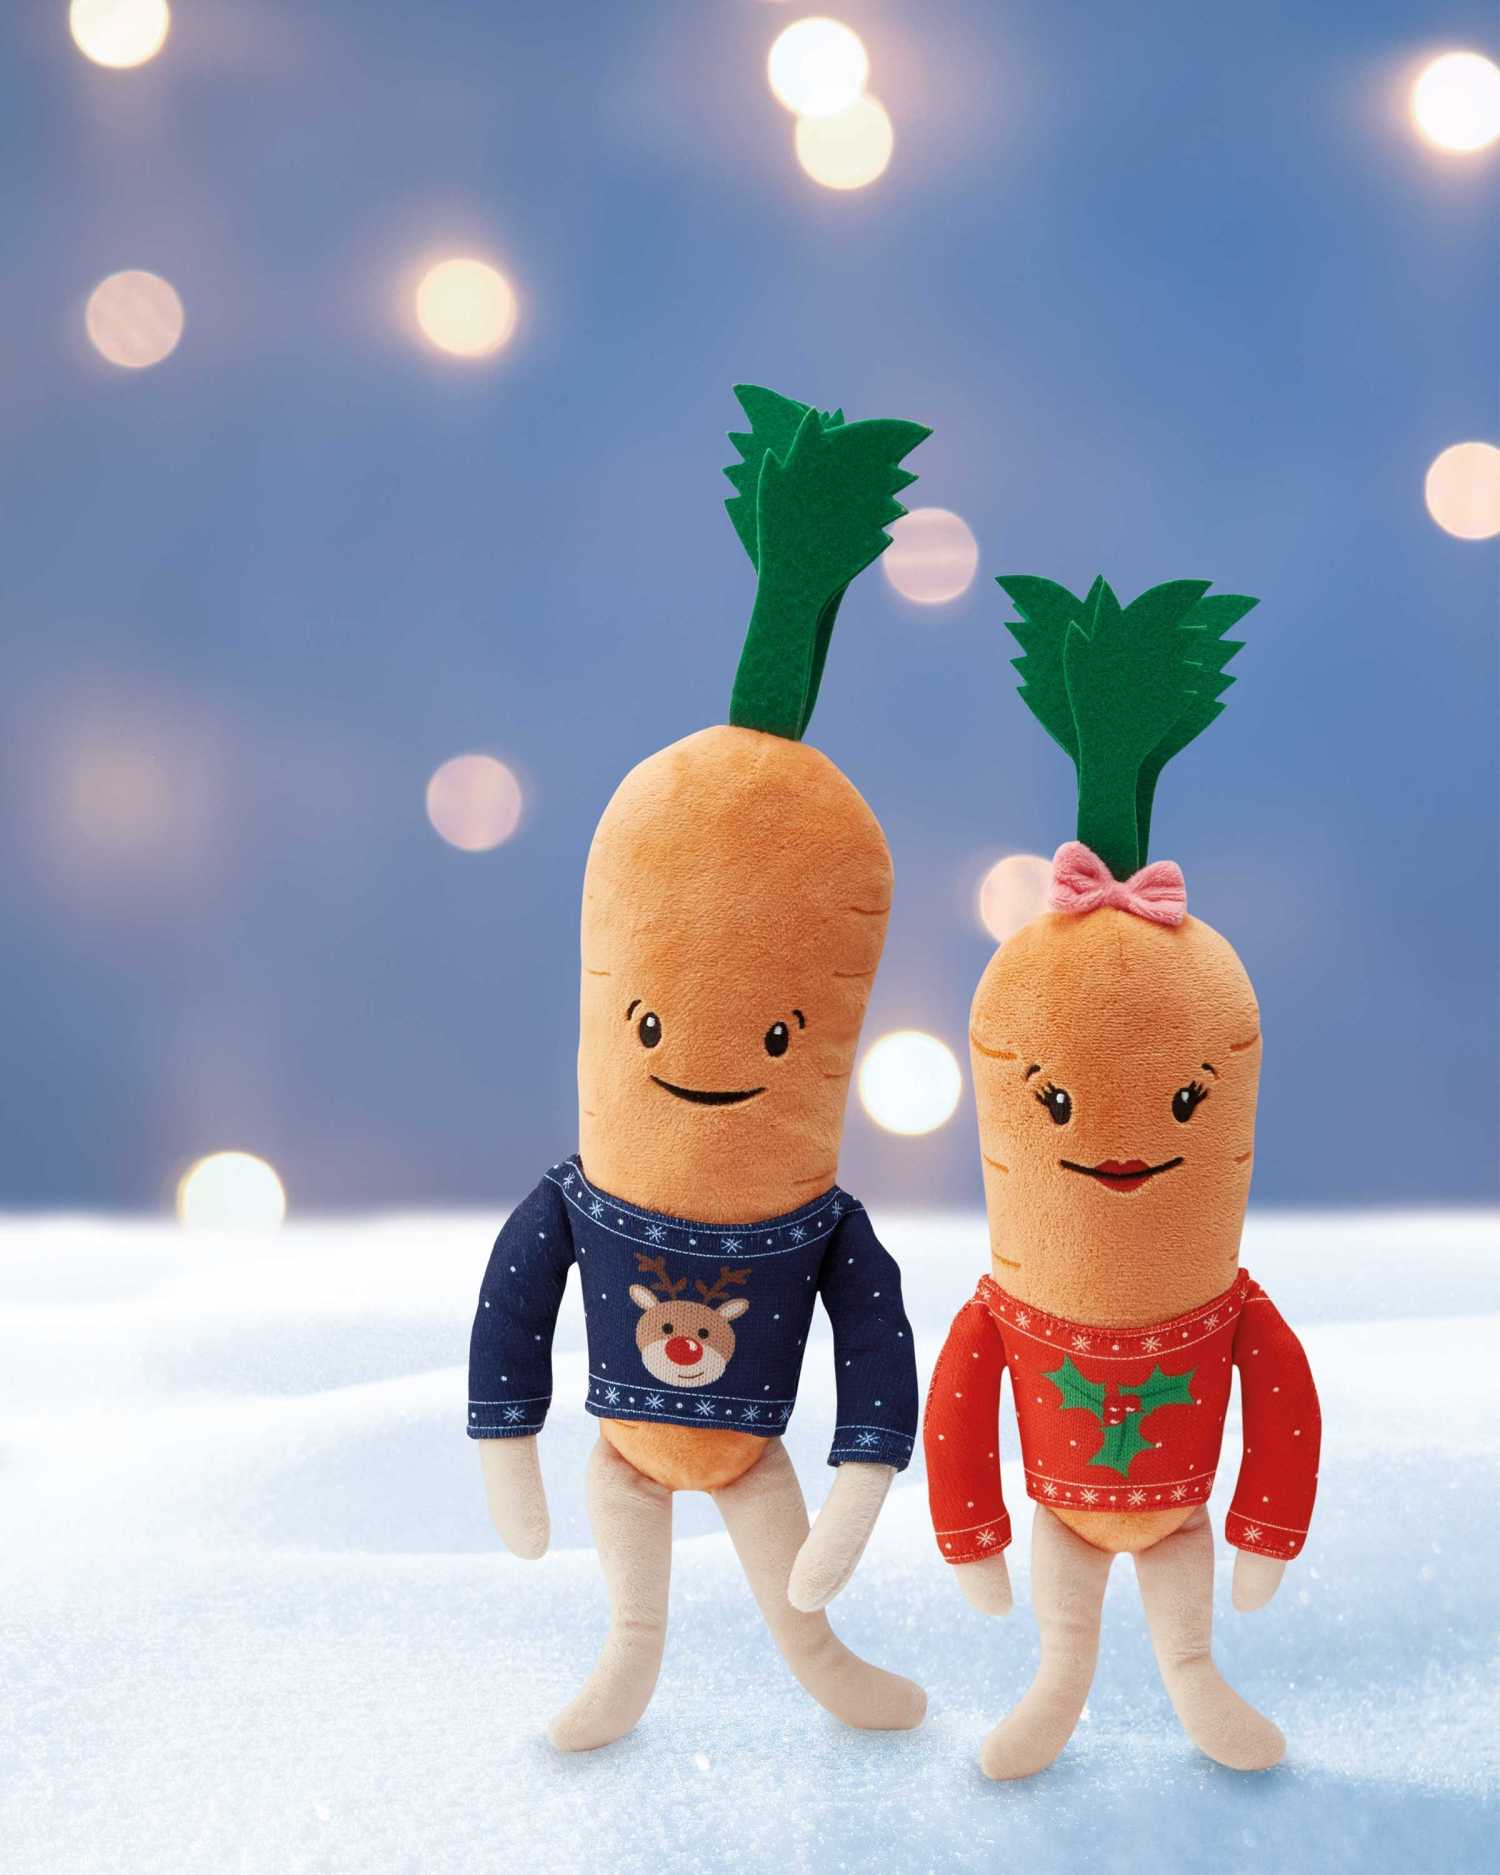 Official Aldi Kevin the Carrot Soft Stuffed Toy Official Genuine 2019 Kevin 